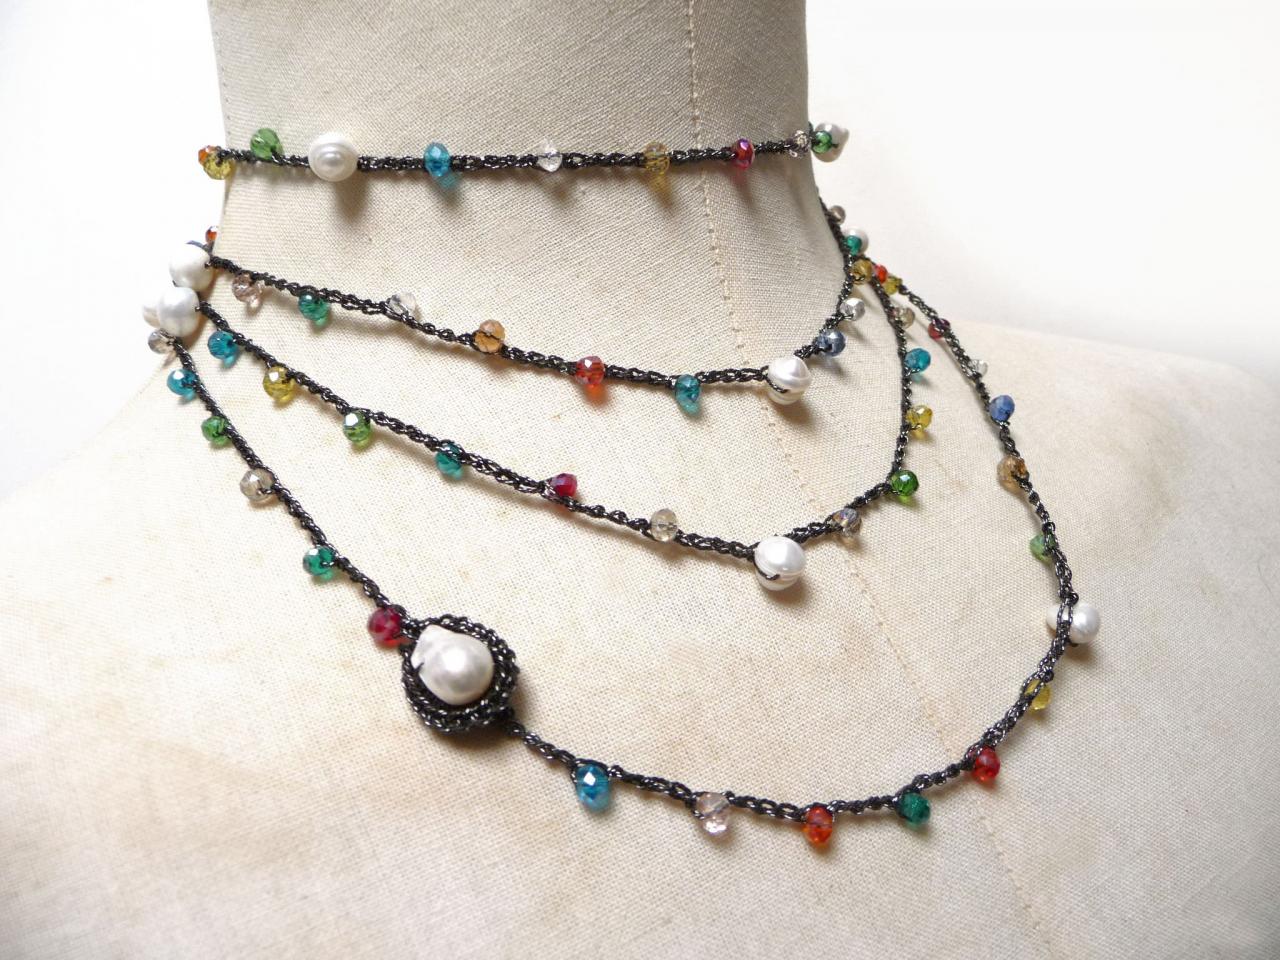 Long Beaded Necklace, Boho Style Multi Wrap Bracelet With Fresh Pearls And Rainbow Tiny Crystals, Rosary Necklace, Crochet Necklace